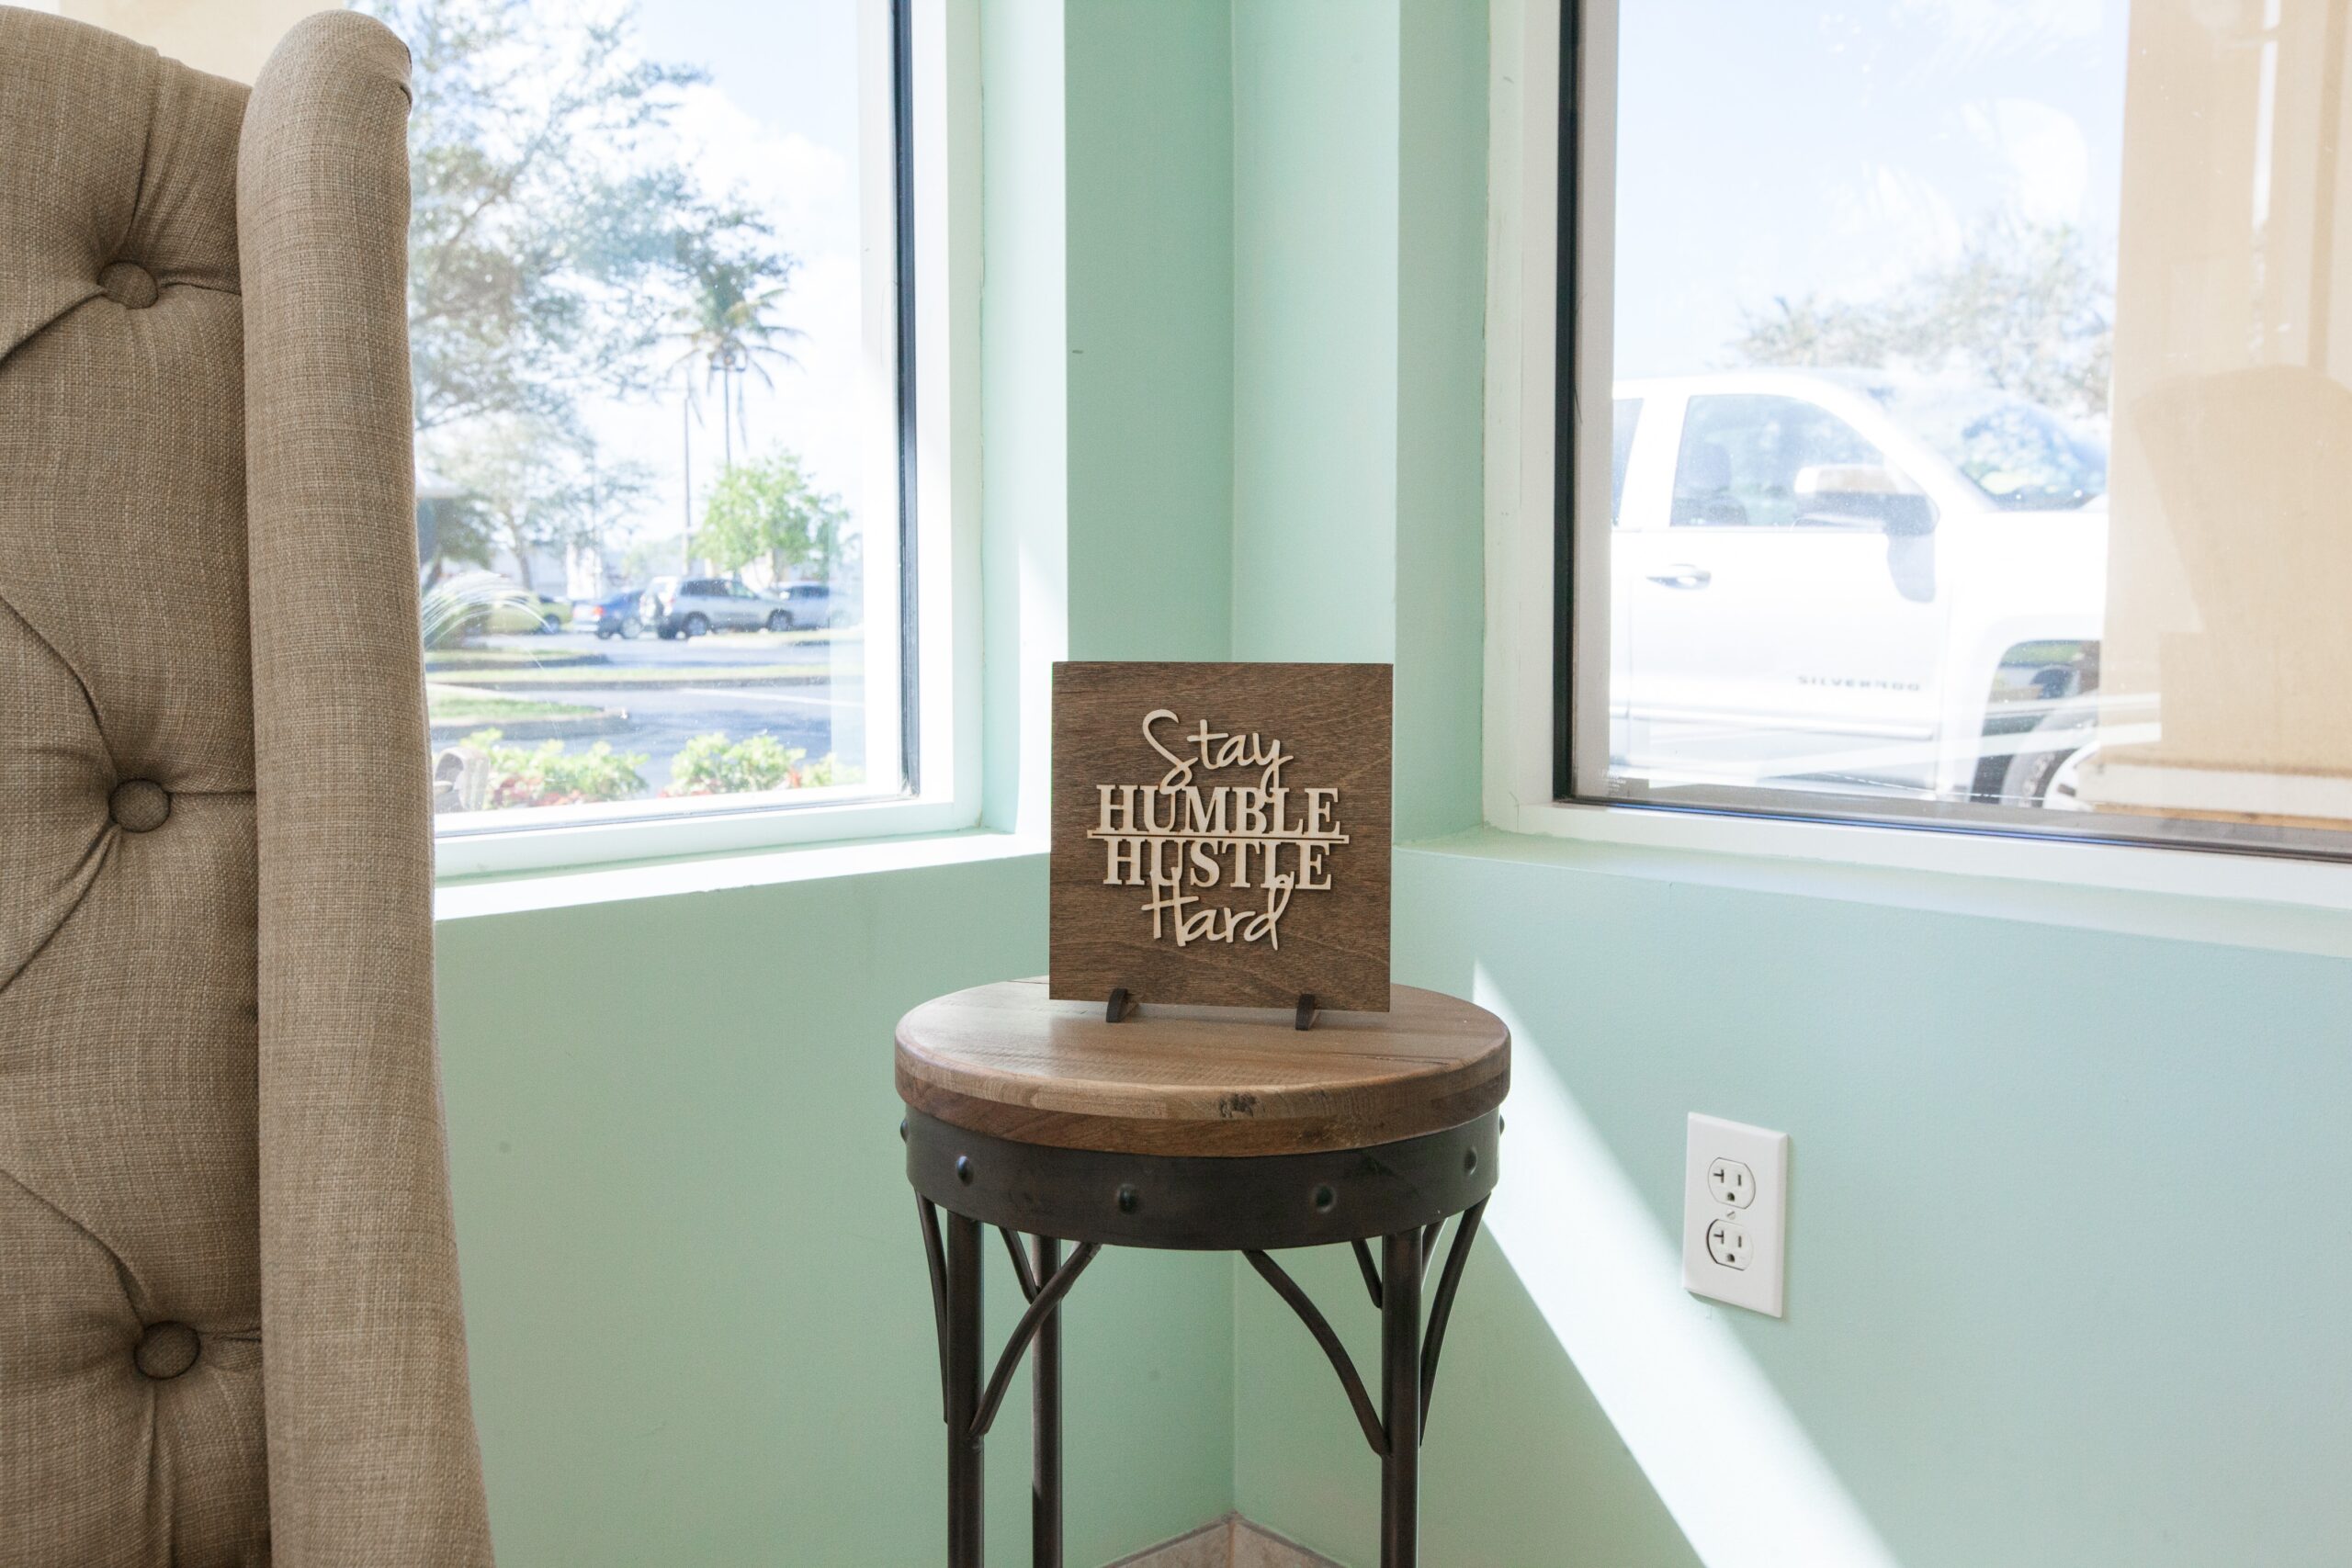 Florida Facilities stay humble hustle hard wood carving on side table